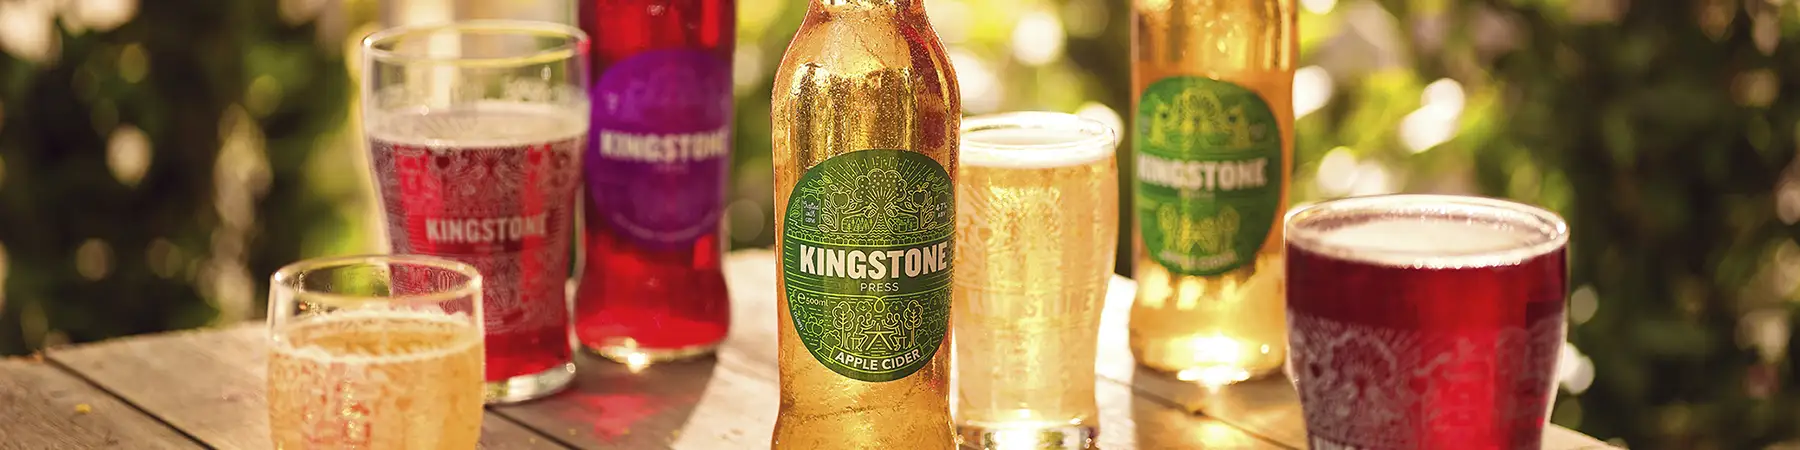 pints and bottles of Kingstons press ciders on table outdoors in sunshine